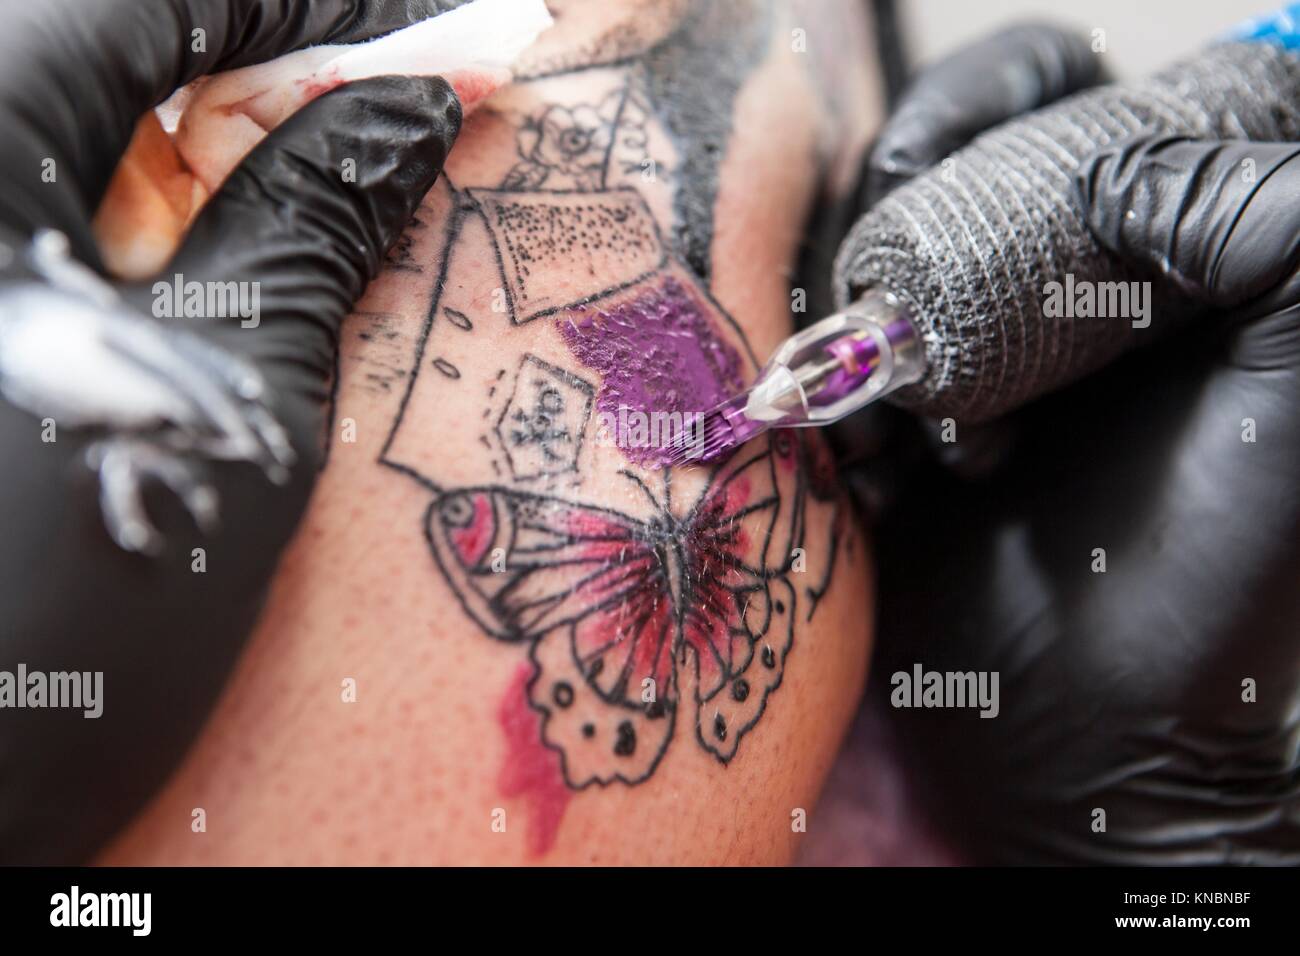 Tattoo artist applies tattoo to arm. She is filling with purple color the tattoo. Stock Photo